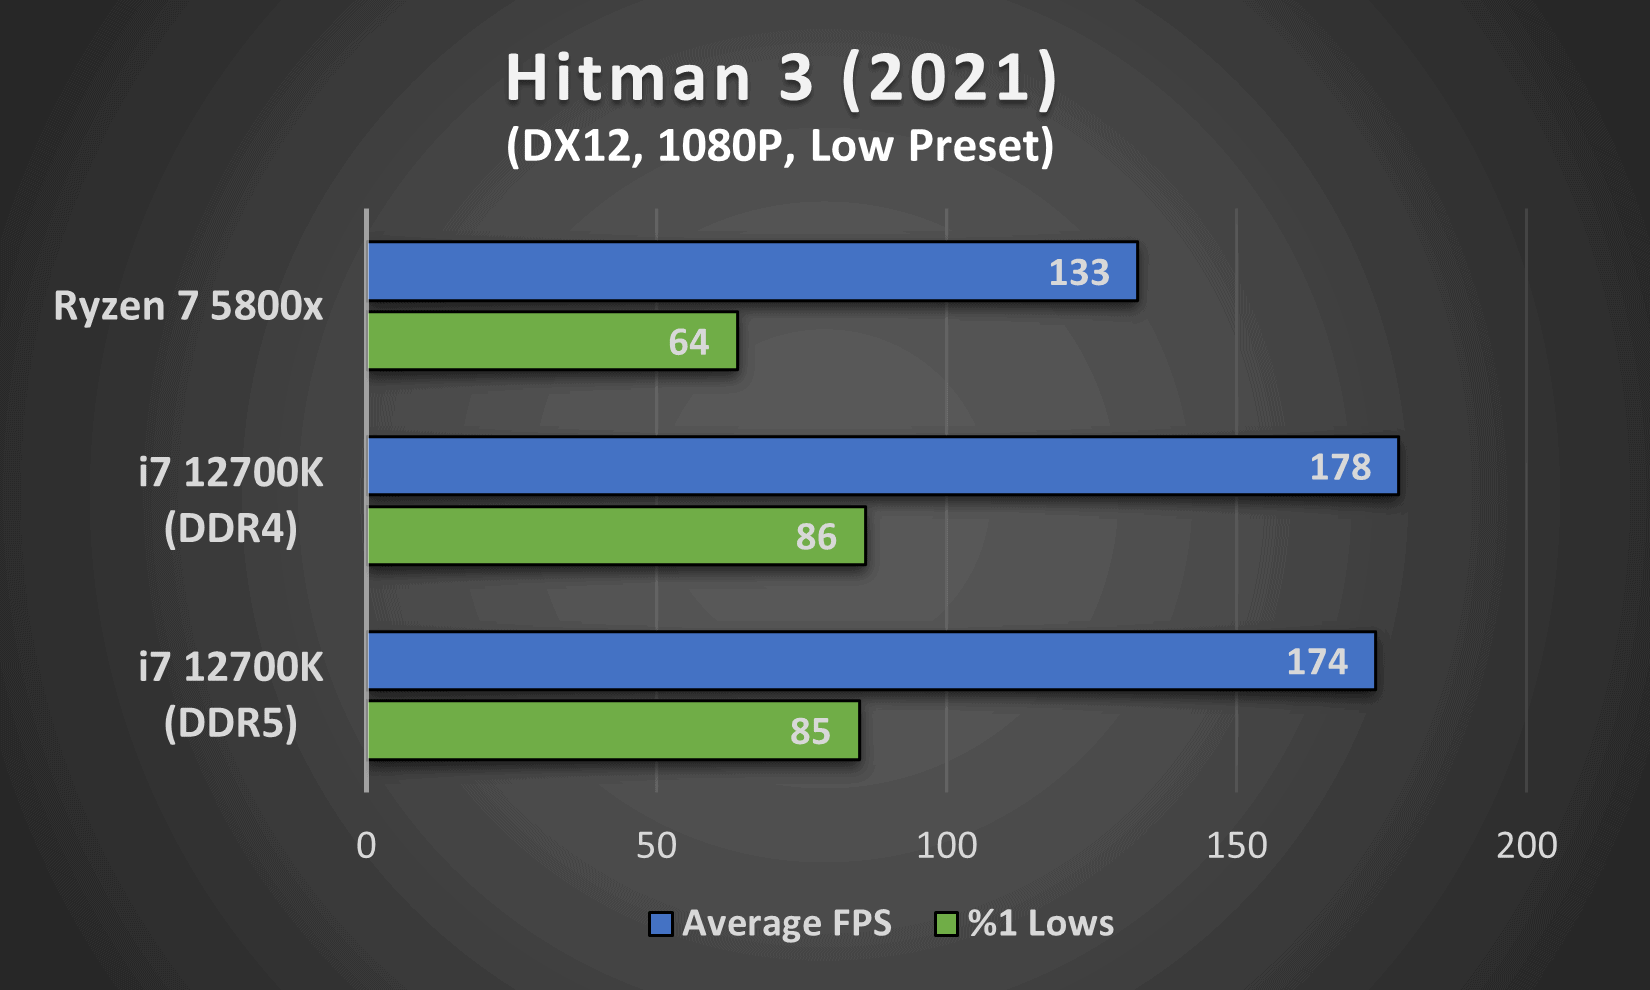 Hitman 3 performance comparison between Intel's i7 12700K (DDR4 and DDR5) and AMD's Ryzen 7 5800x